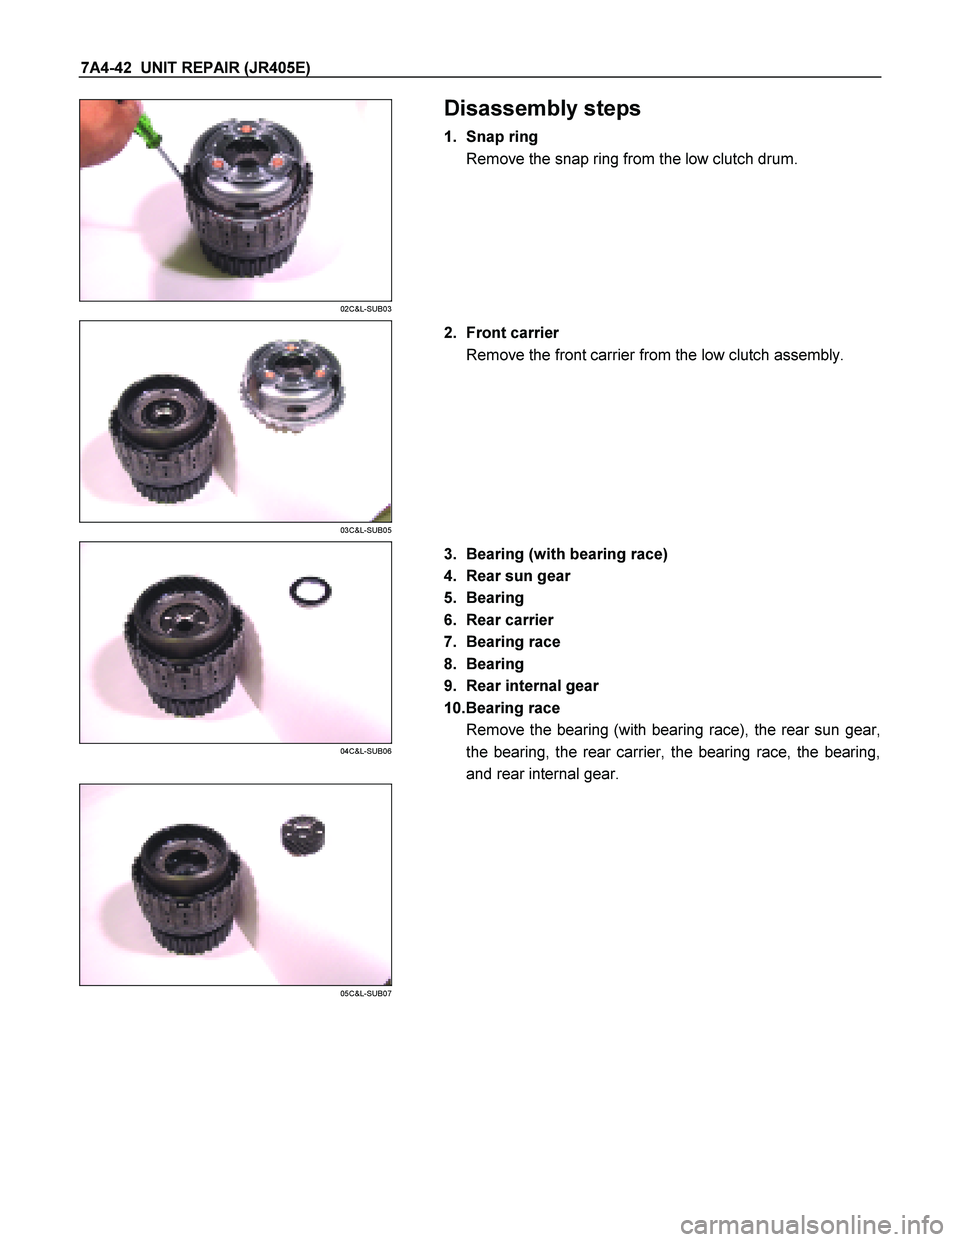 ISUZU TF SERIES 2004  Workshop Manual 7A4-42  UNIT REPAIR (JR405E) 
 
02C&L-SUB03 
  
 Disassembly steps 
1. Snap ring  
Remove the snap ring from the low clutch drum. 
 
 
03C&L-SUB05 
  
   2. Front carrier  
Remove the front carrier fr